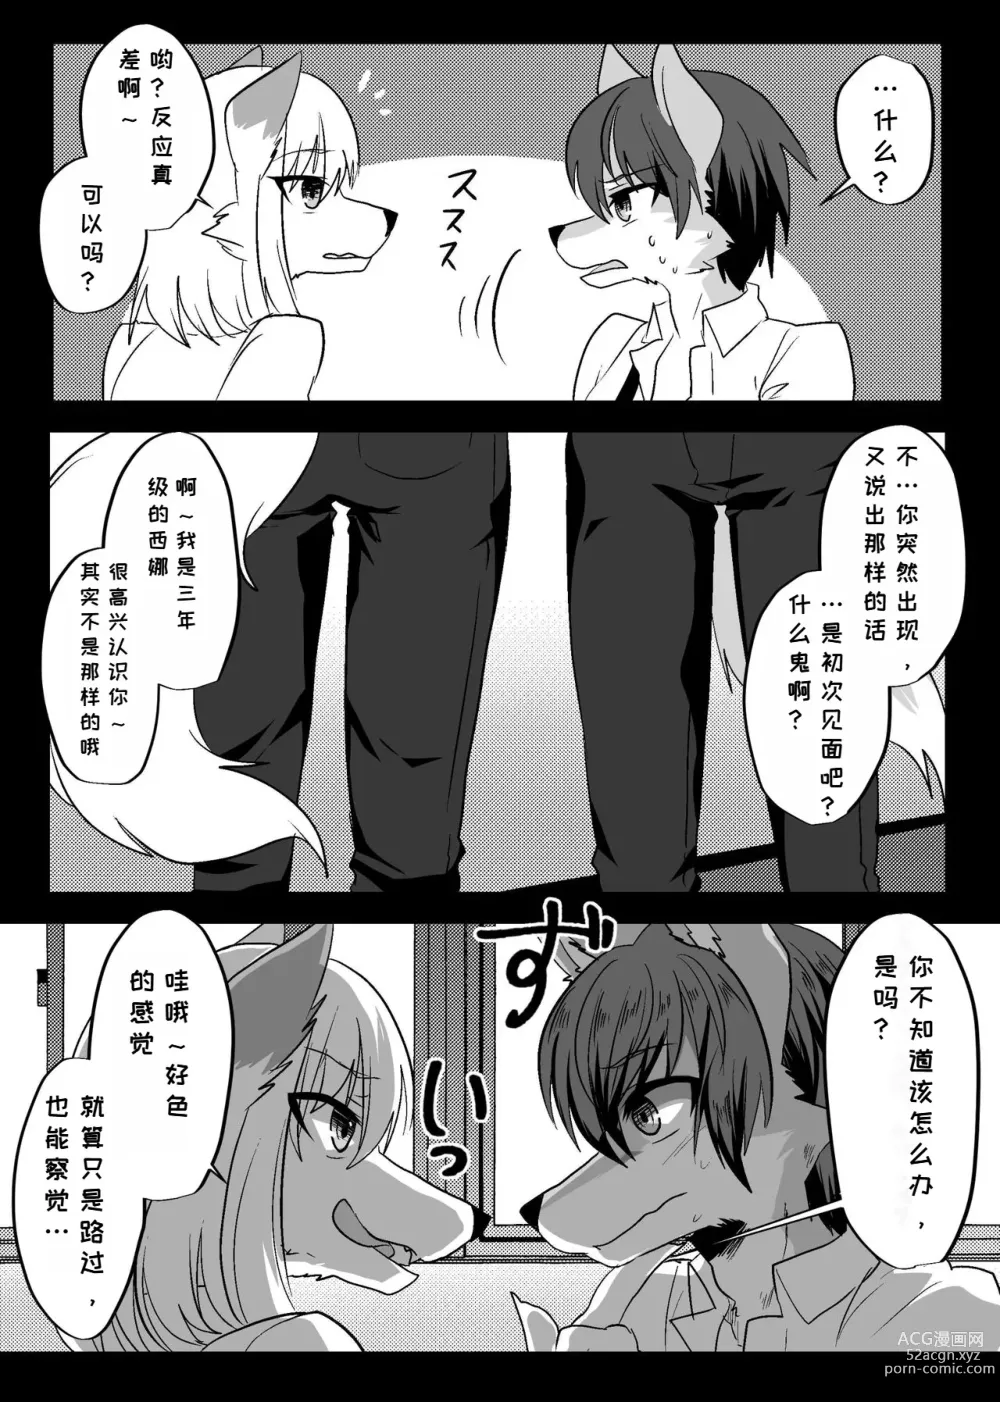 Page 4 of doujinshi 我们发情出勤科 3